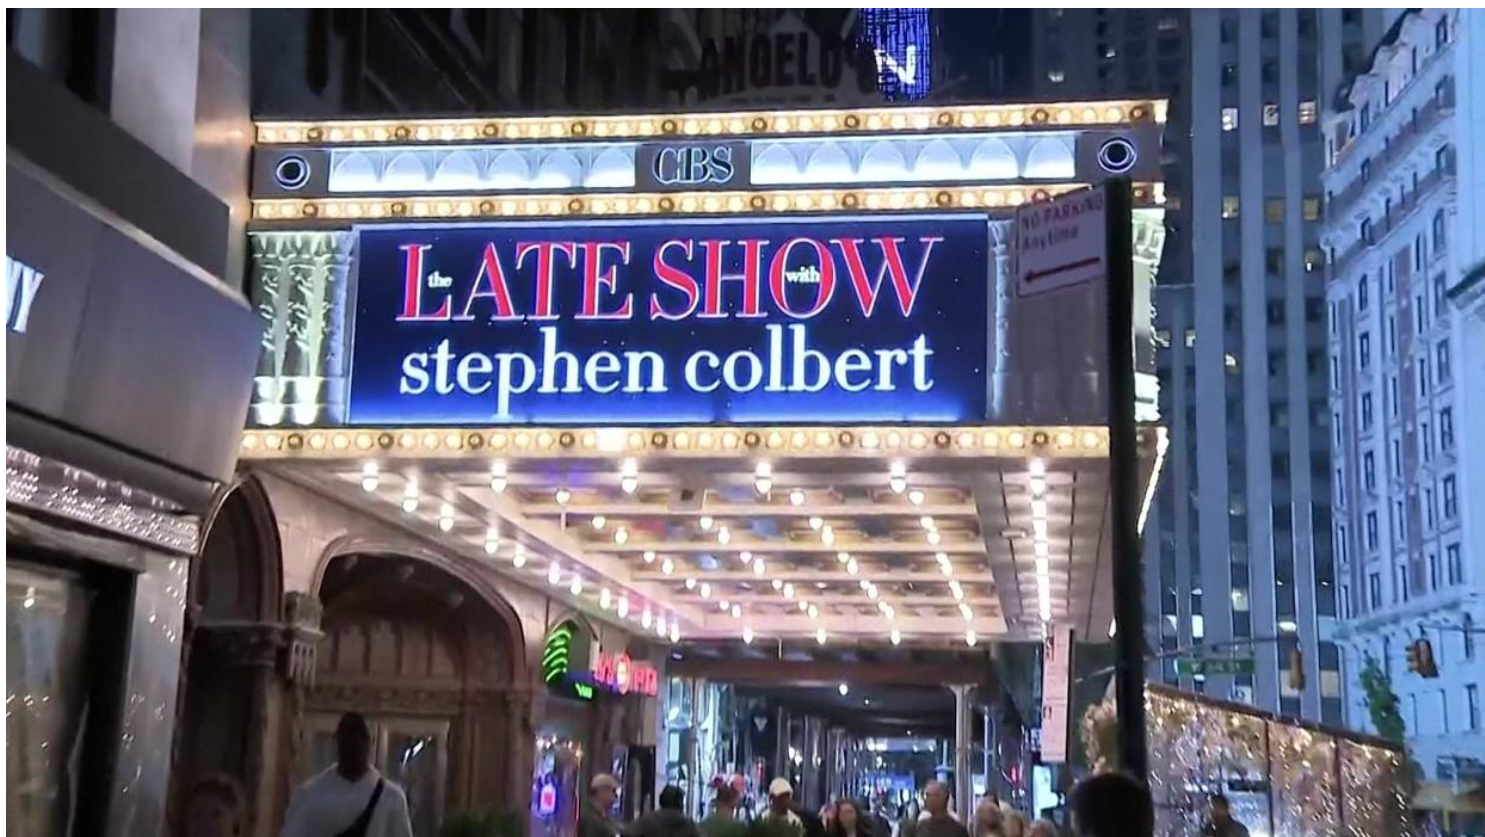 CBS Bay Area Win 2 tickets to the Late Show with Stephen Colbert